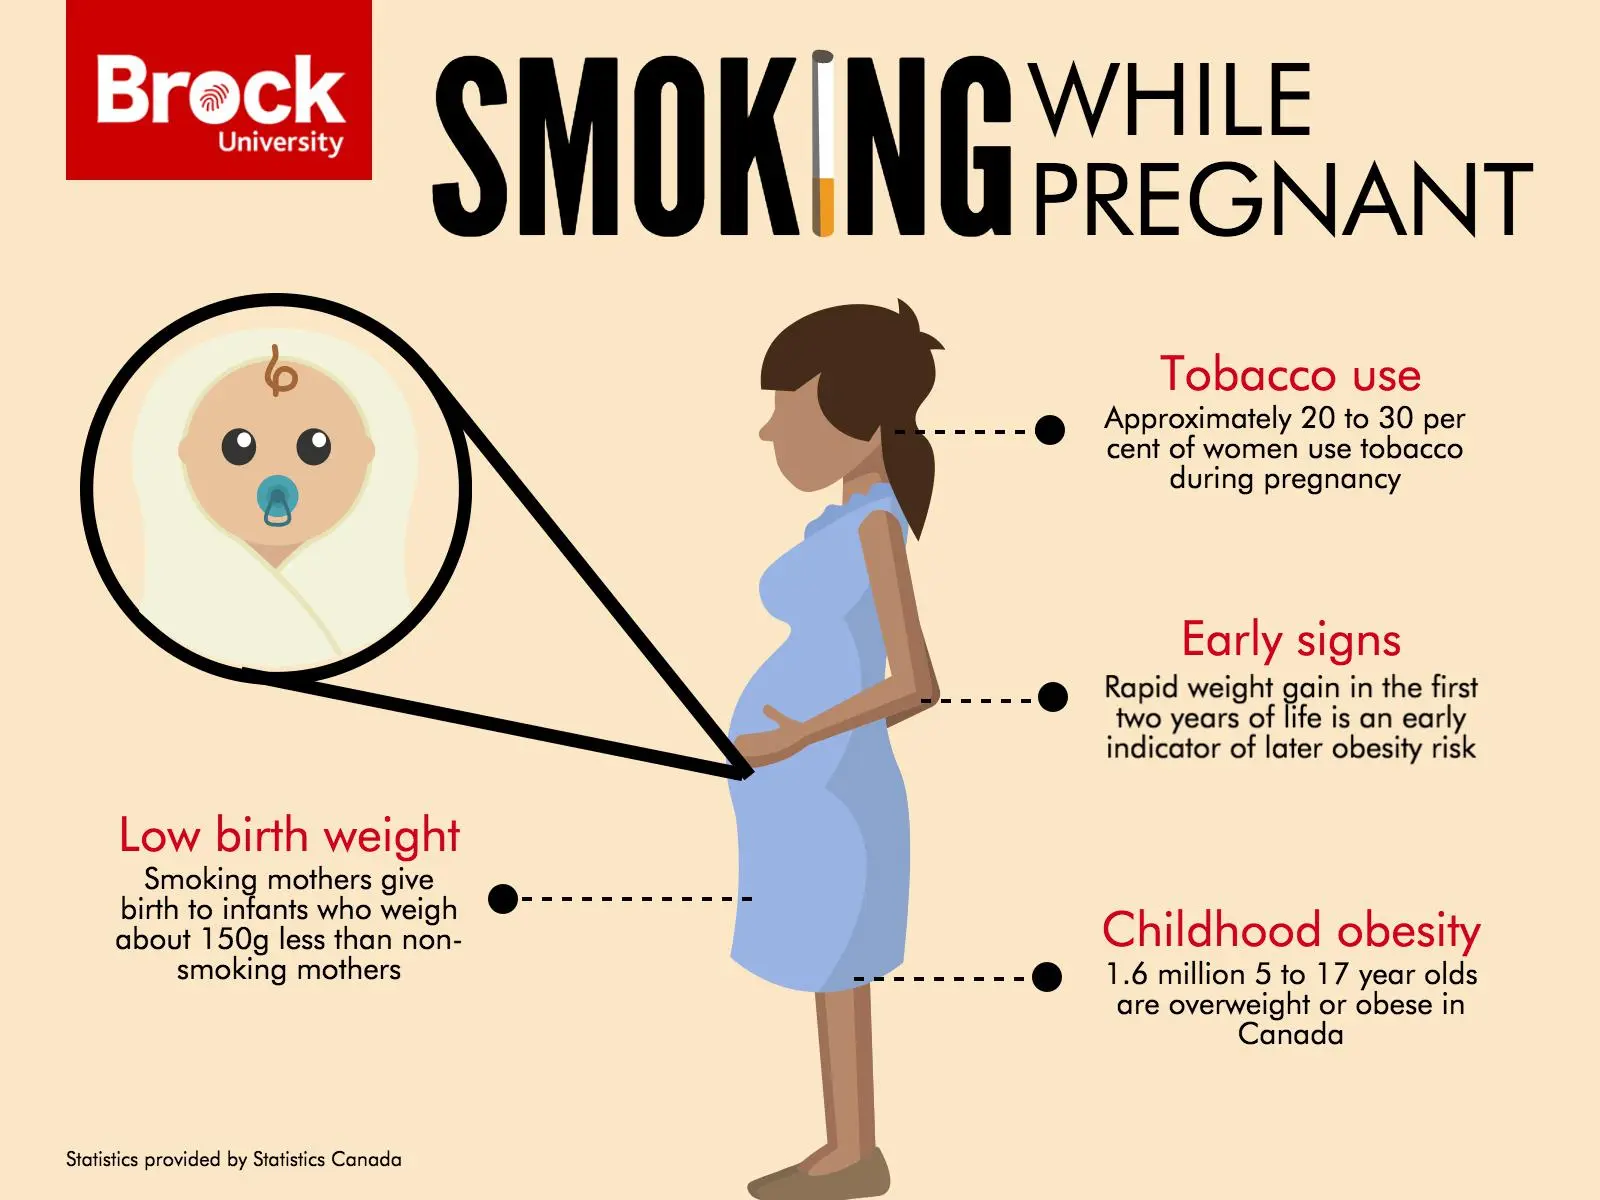 i smoked while pregnant - Can the smell of cigarettes harm my unborn baby